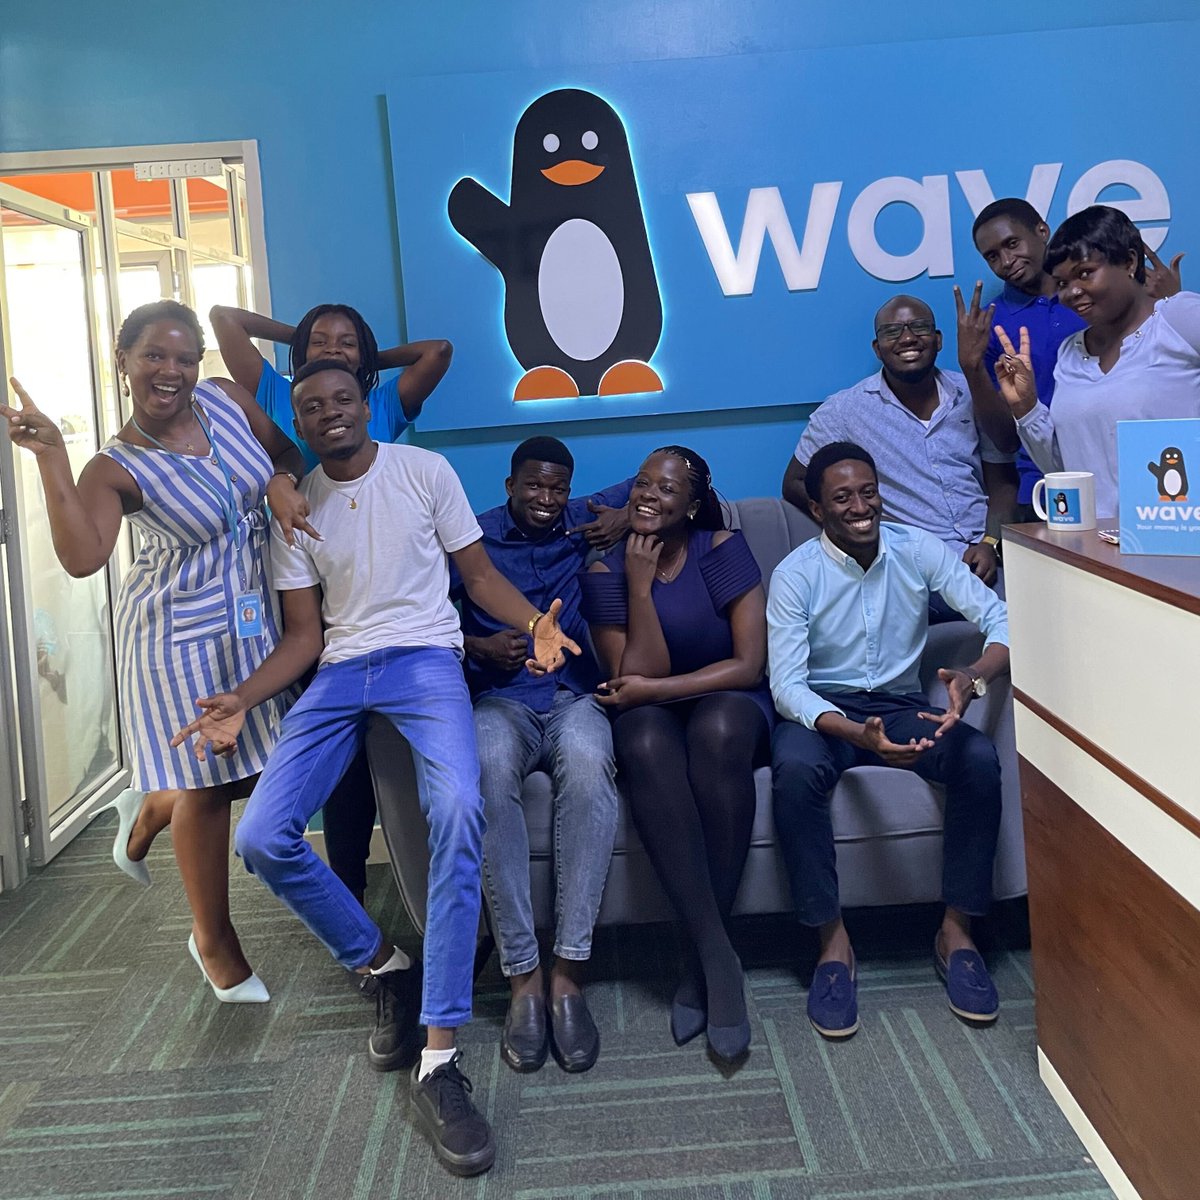 We appreciate your support and commitment to using Wave services💙
Happy Customer Service Week! #celebrateservice
#SenteZoZizo
#WaveUg